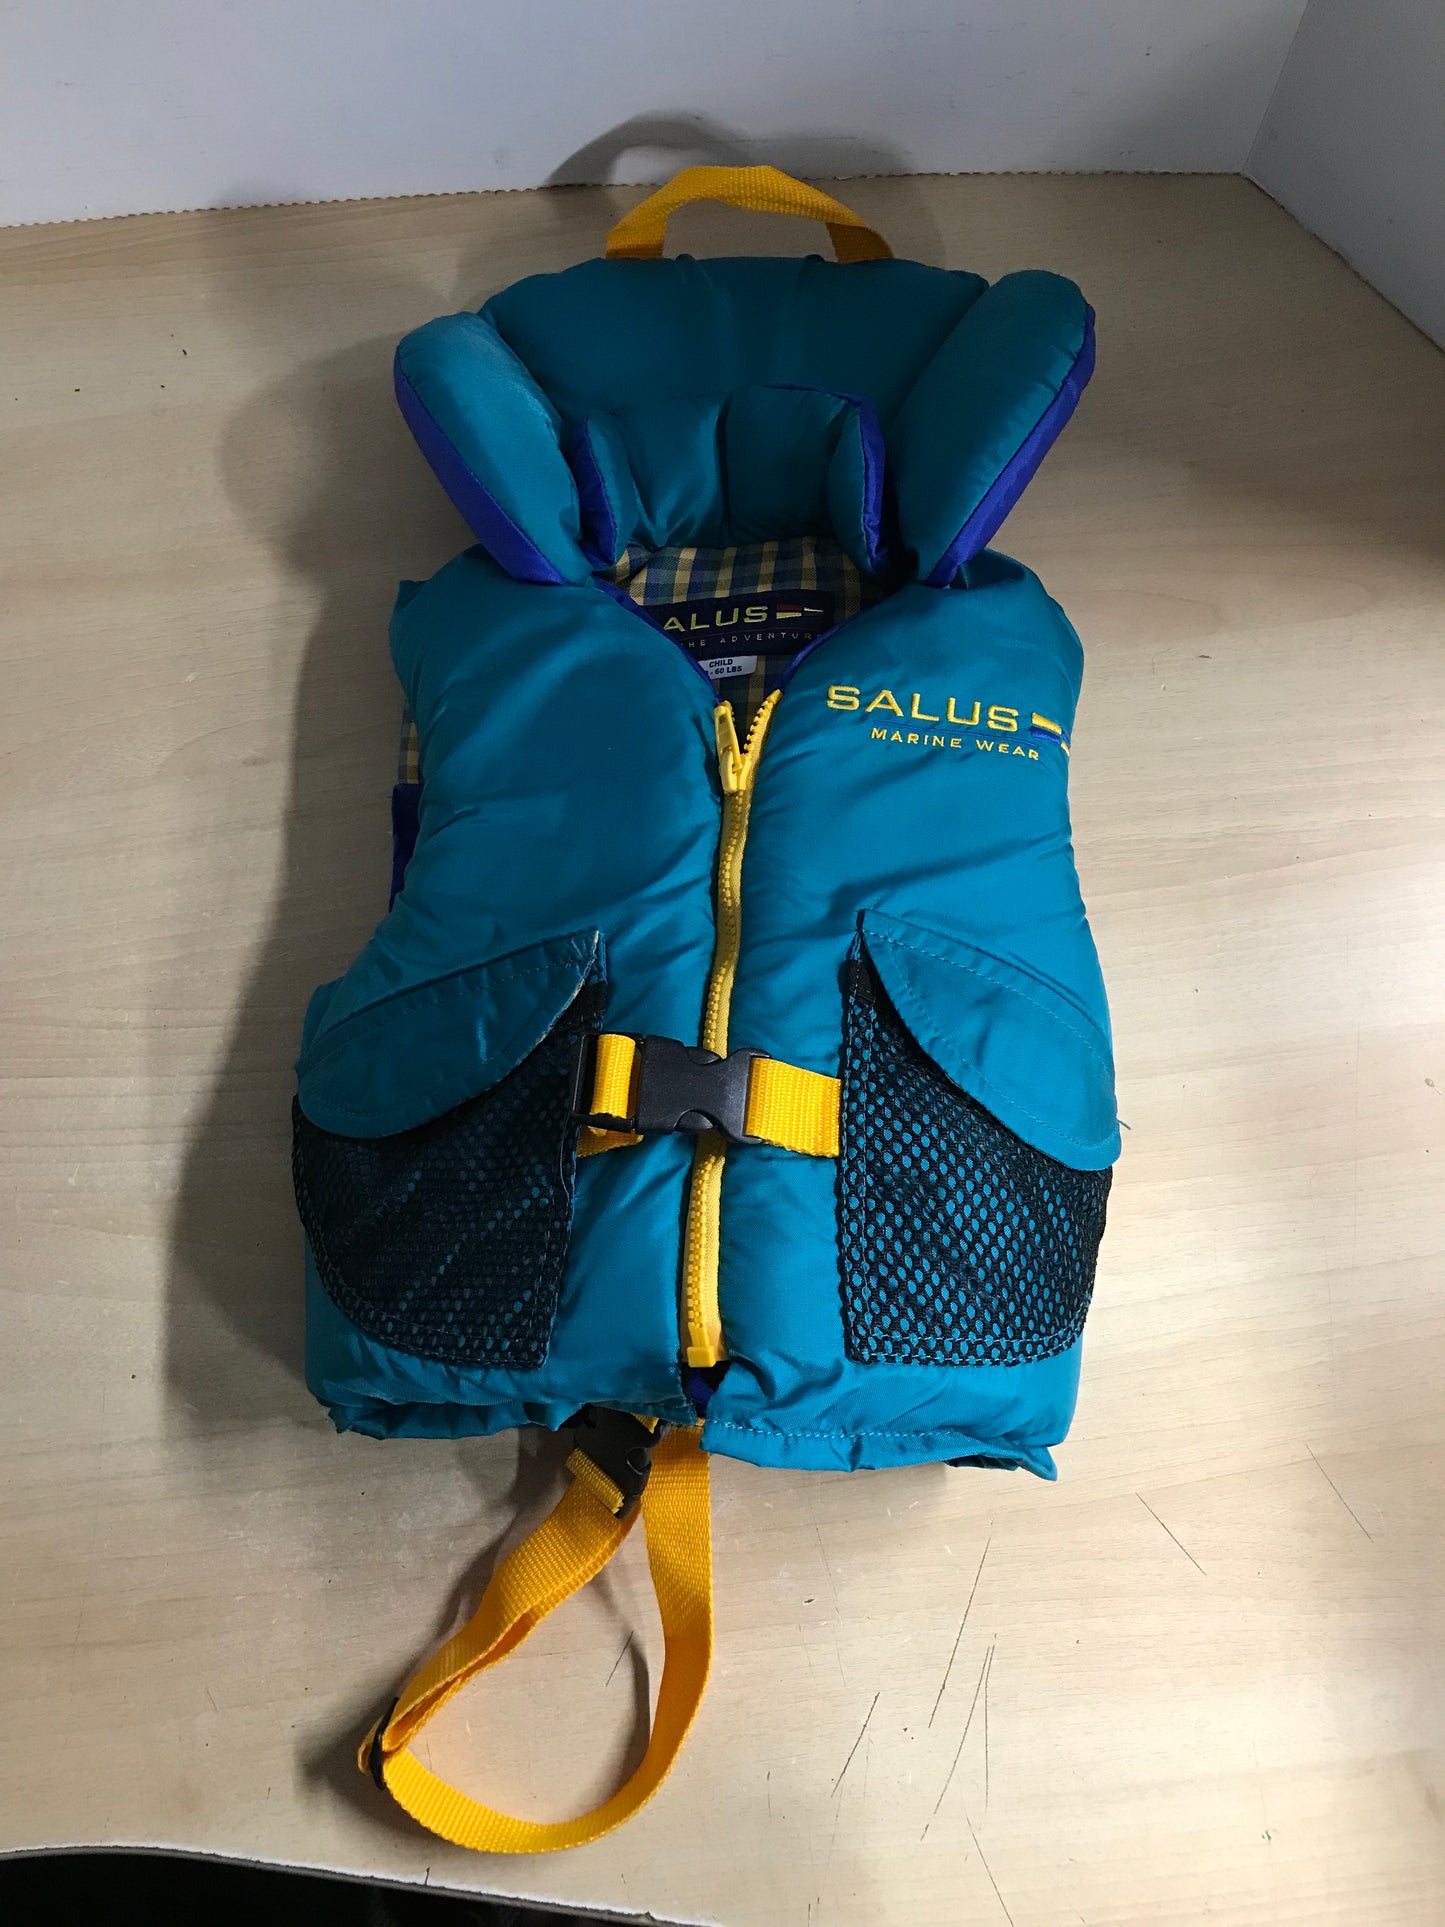 Life Jacket Child Size 30-60 Lb Salus Double Neck Support Teal Yellow Excellent